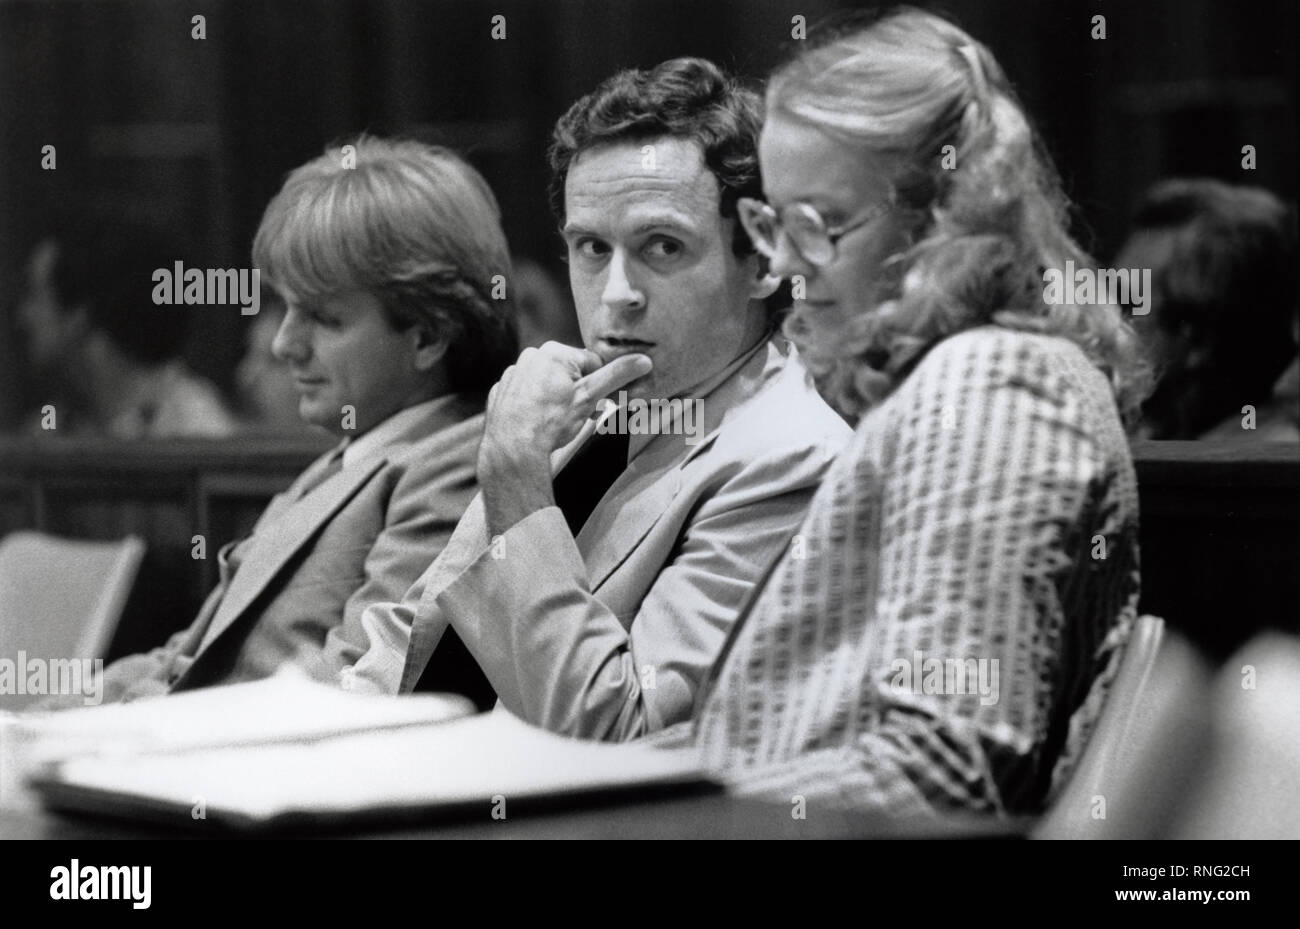 Ted Bundy Murder Trial - Miami - Ted Bundy with defense attorney Margaret Good at the defense table. Theodore Robert Bundy was an American serial killer, kidnapper, rapist, burglar, and necrophile who assaulted and murdered numerous young women and girls during the 1970s and possibly earlier. After more than a decade of denials, he confessed to 30 homicides that he committed in seven states between 1974 and 1978. Stock Photo